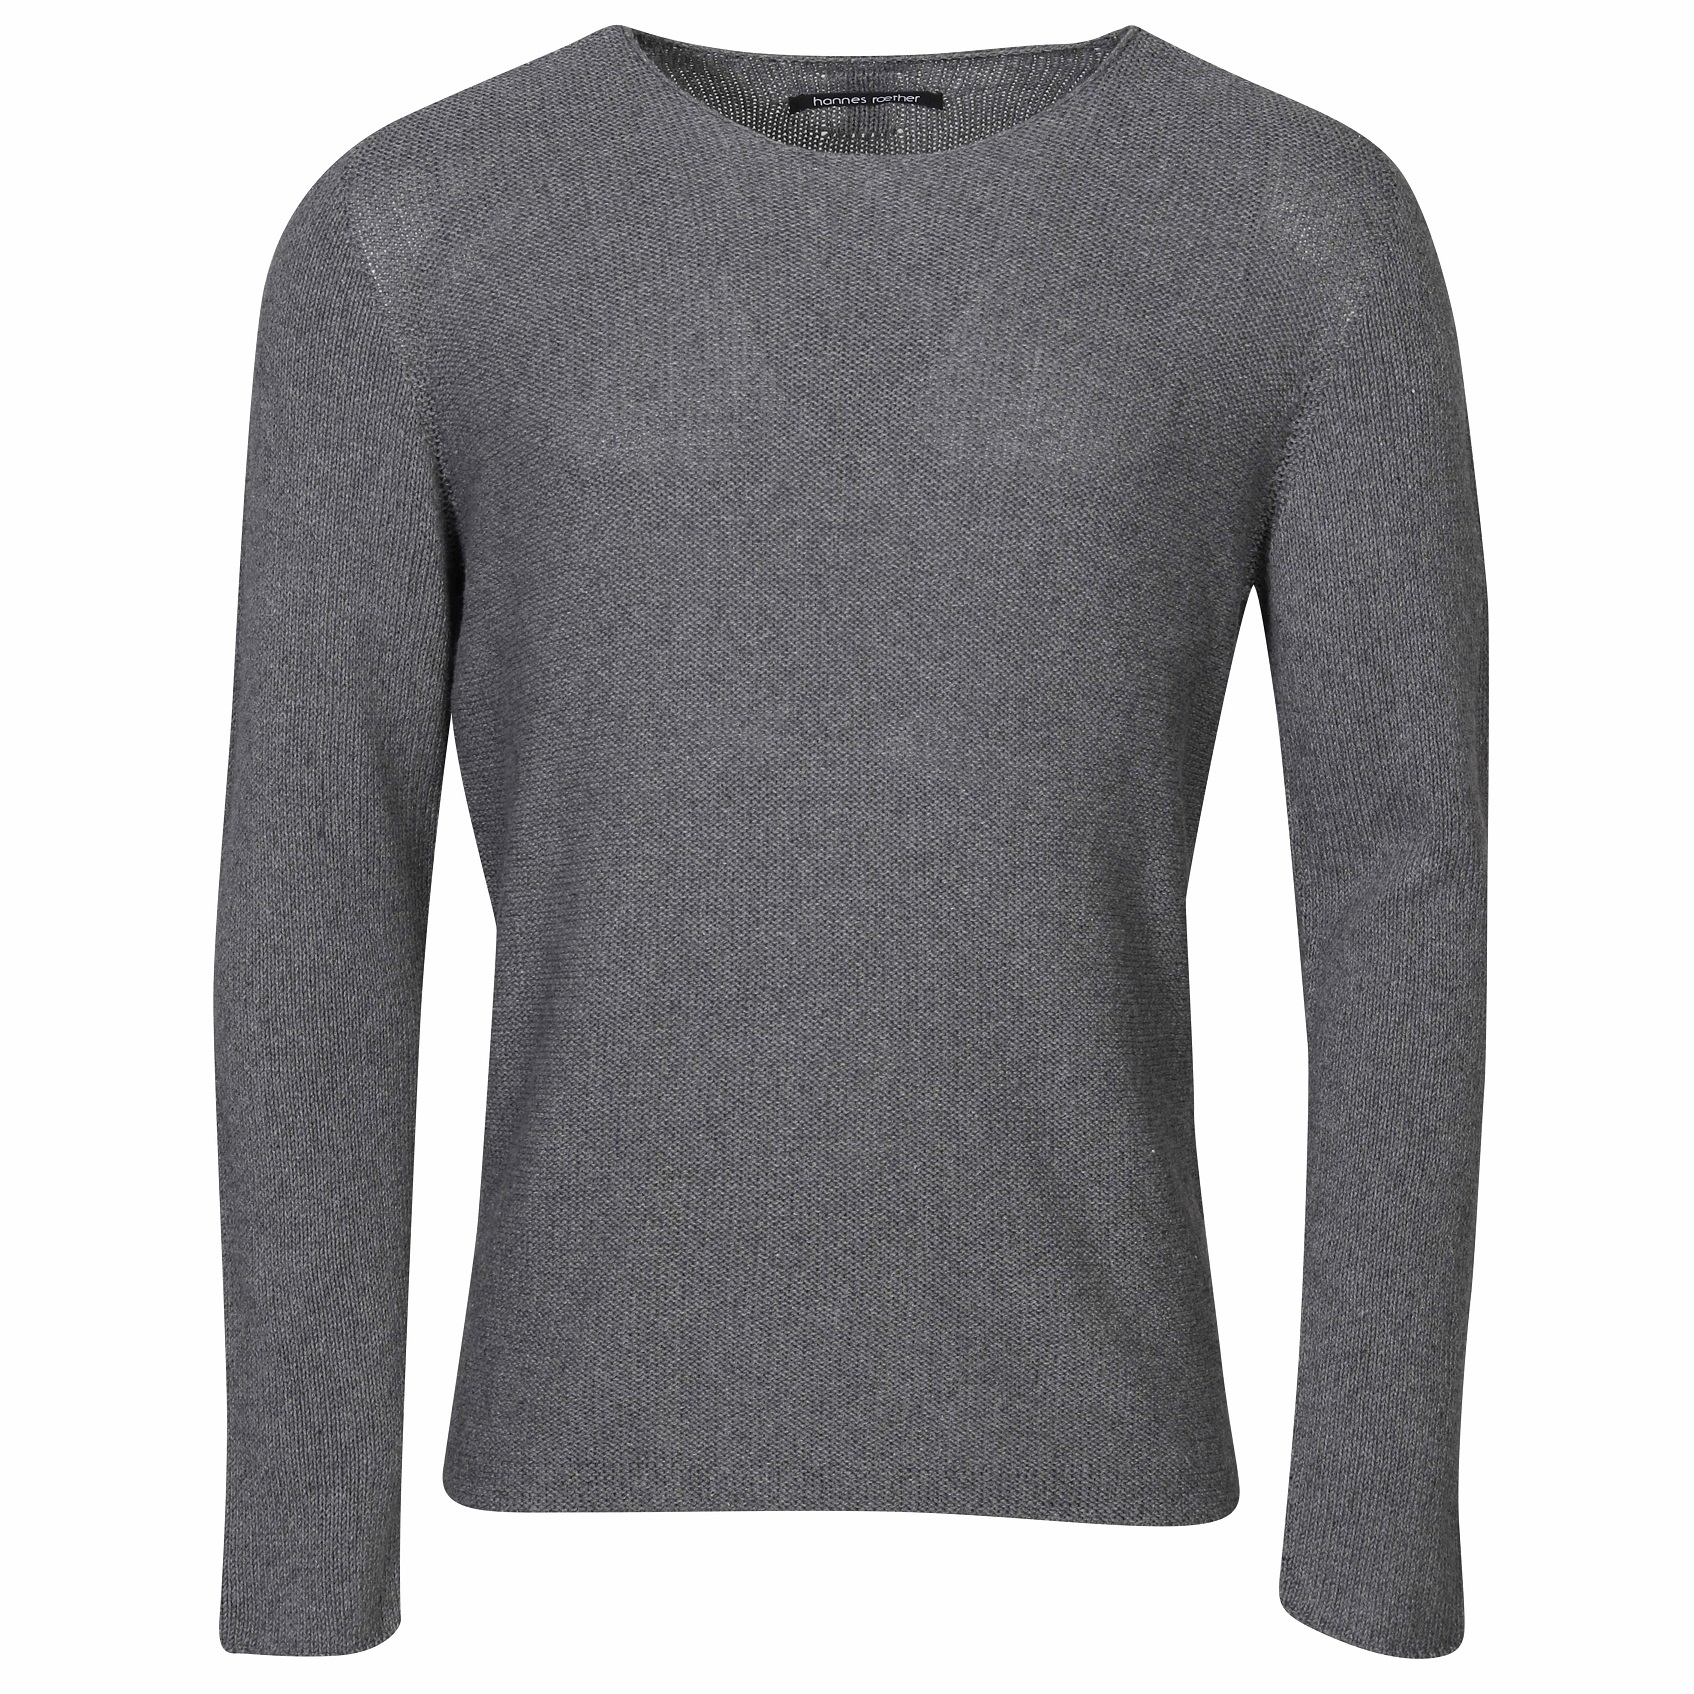 HANNES ROETHER Knit Sweater in Grey XXL